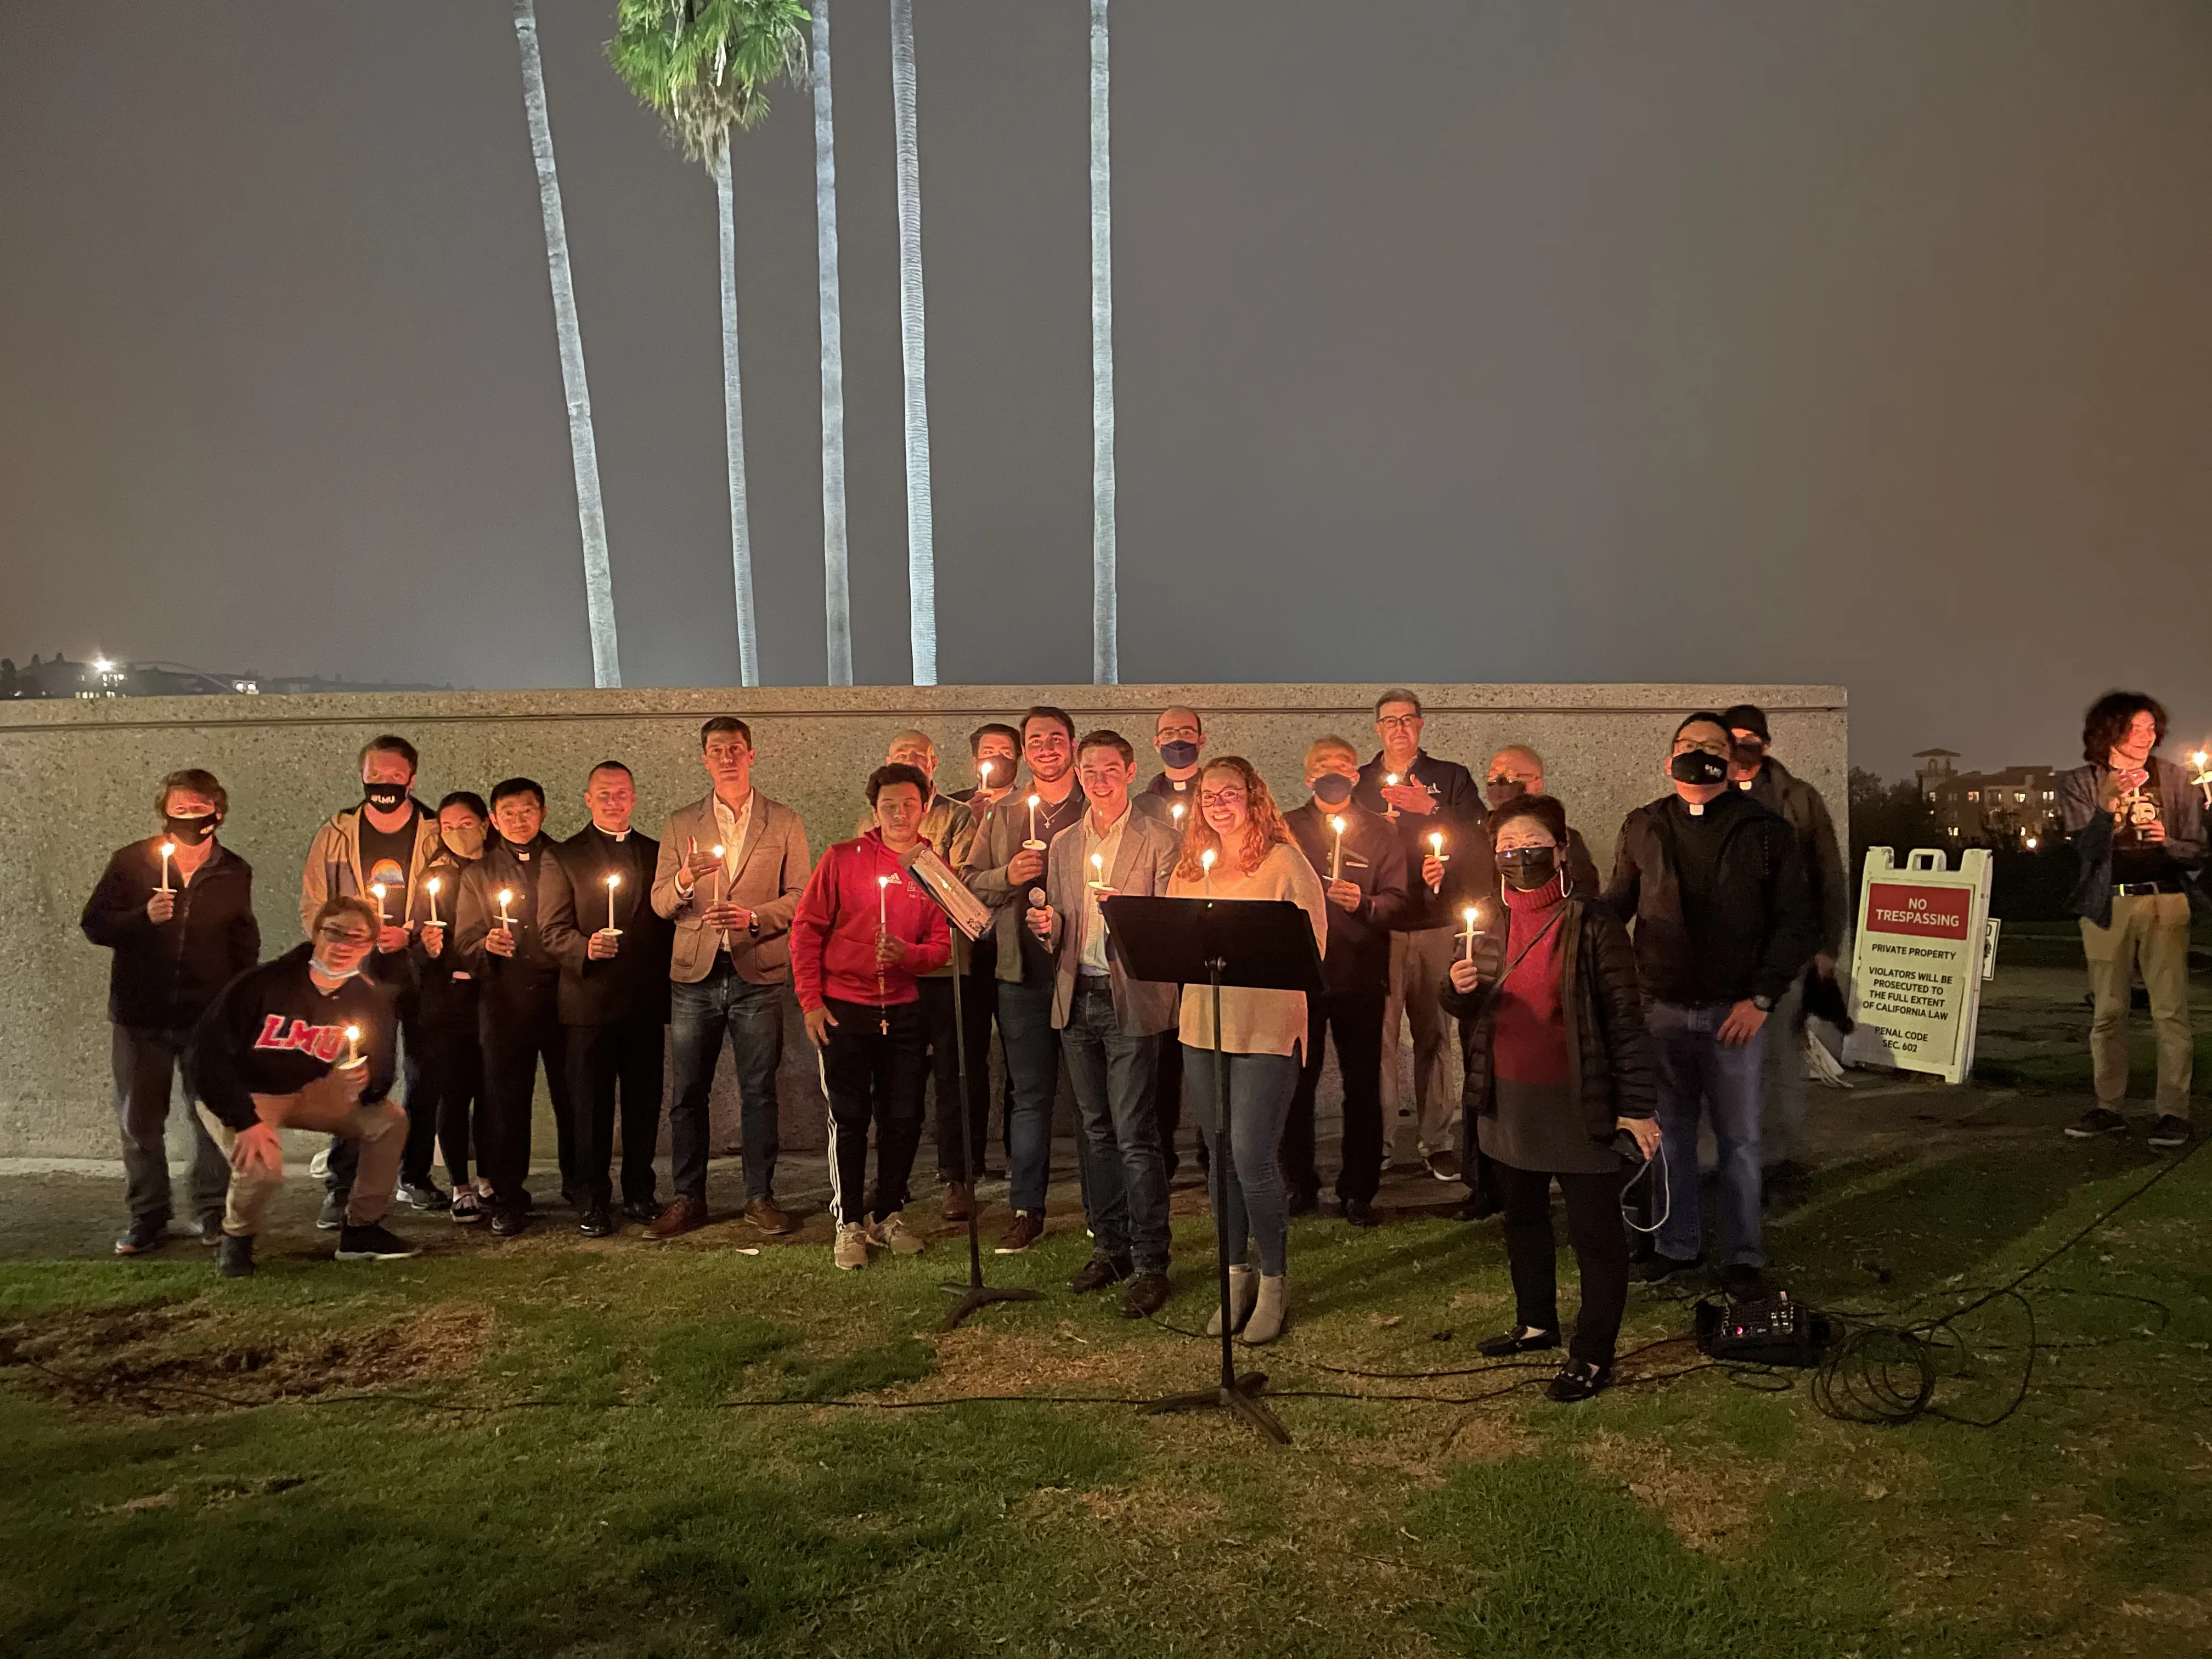 Students, Jesuits, and faculty taking part in the rosary rally held on LMU's campus in response to the university's refusal to cancel the Women in Politics club's Planned Parenthood fundraiser.?w=200&h=150